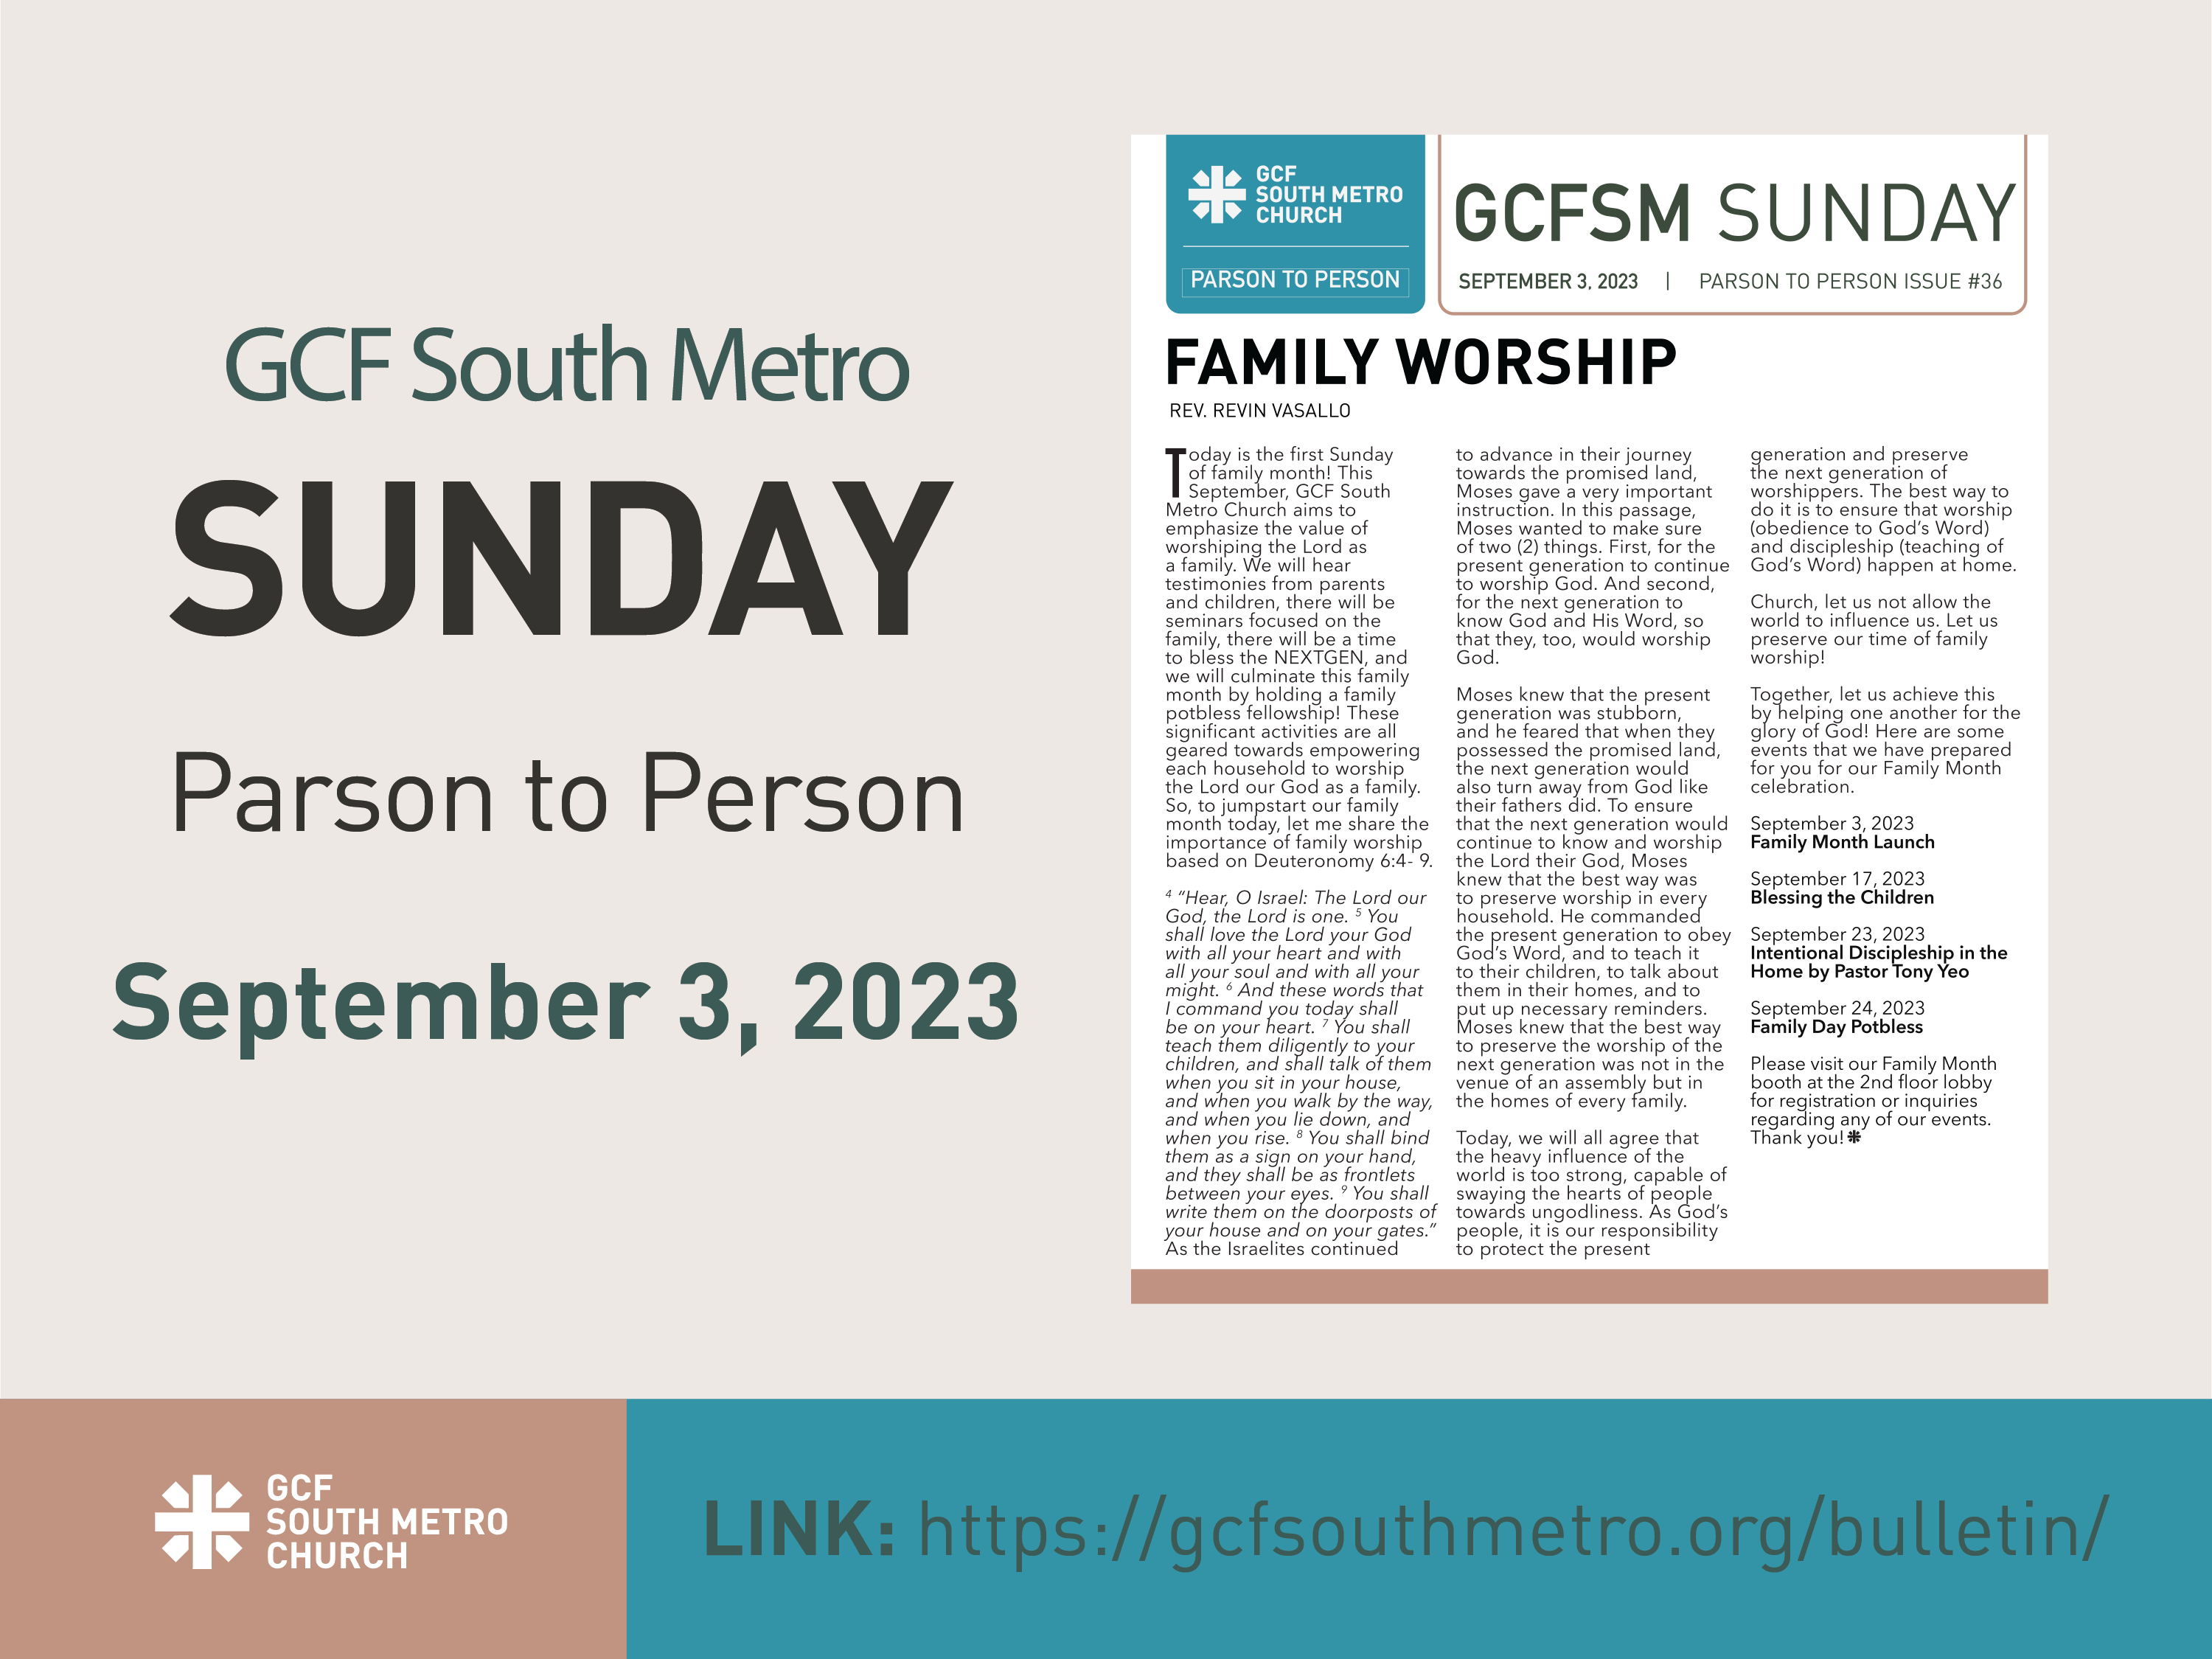 Sunday Bulletin – Parson to Person, September 3, 2023